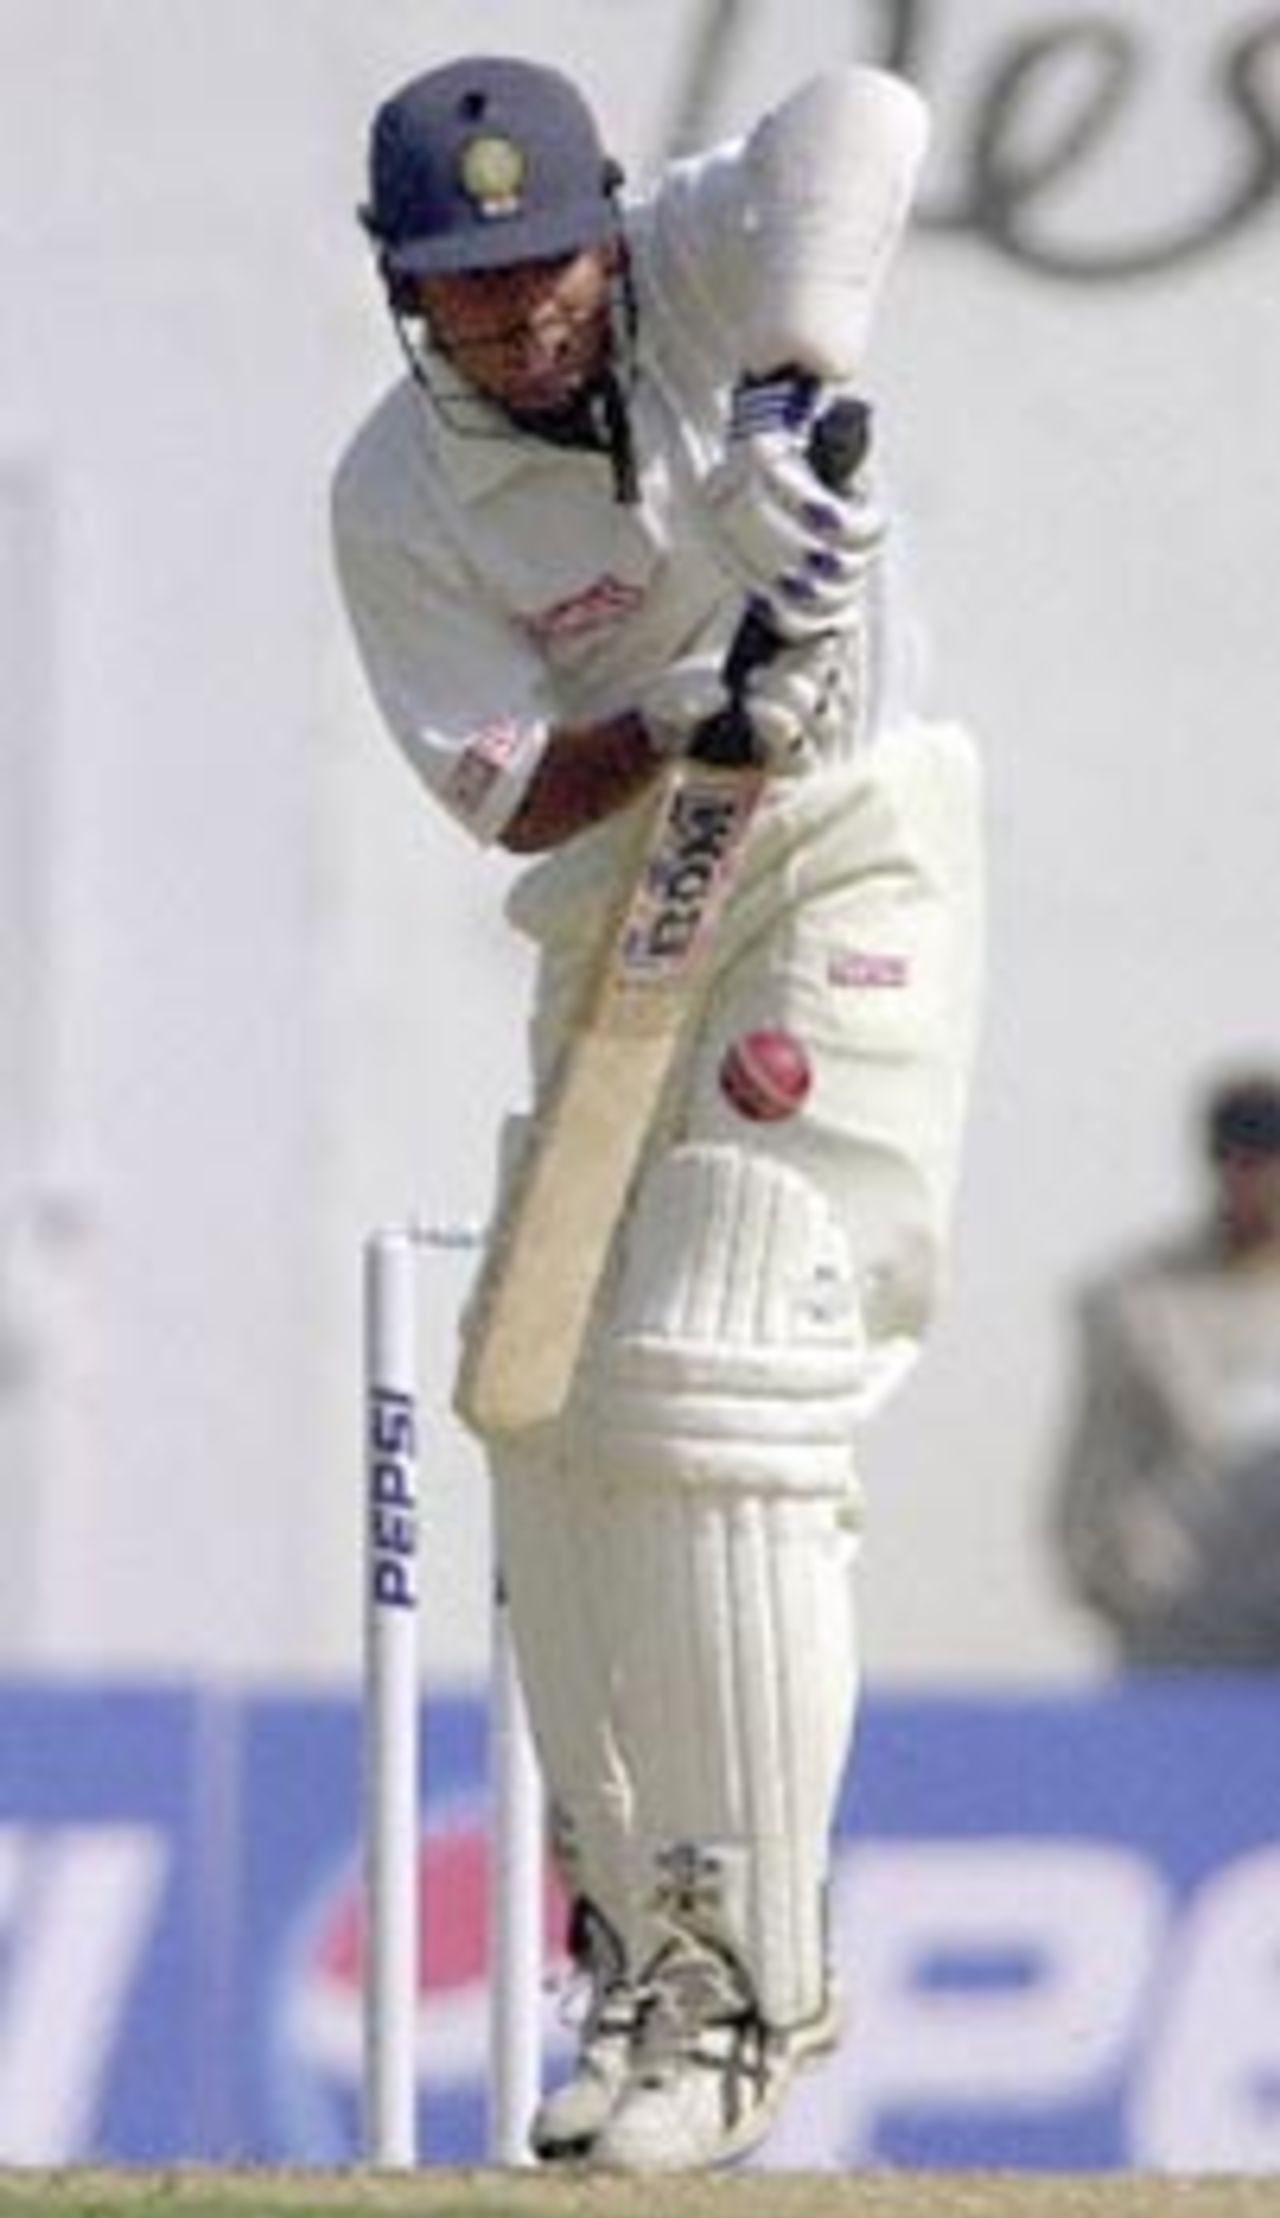 Idian opening batsman Shiv Das blocks a ball during the first day of the second Test cricket match between India and Zimbabwe in Nagpur, 25 November 2000. Das scored 110 runs and India made 306 for 2 at close of the first day's play. India leads Zimbabwe 1-0 in the two Test series.